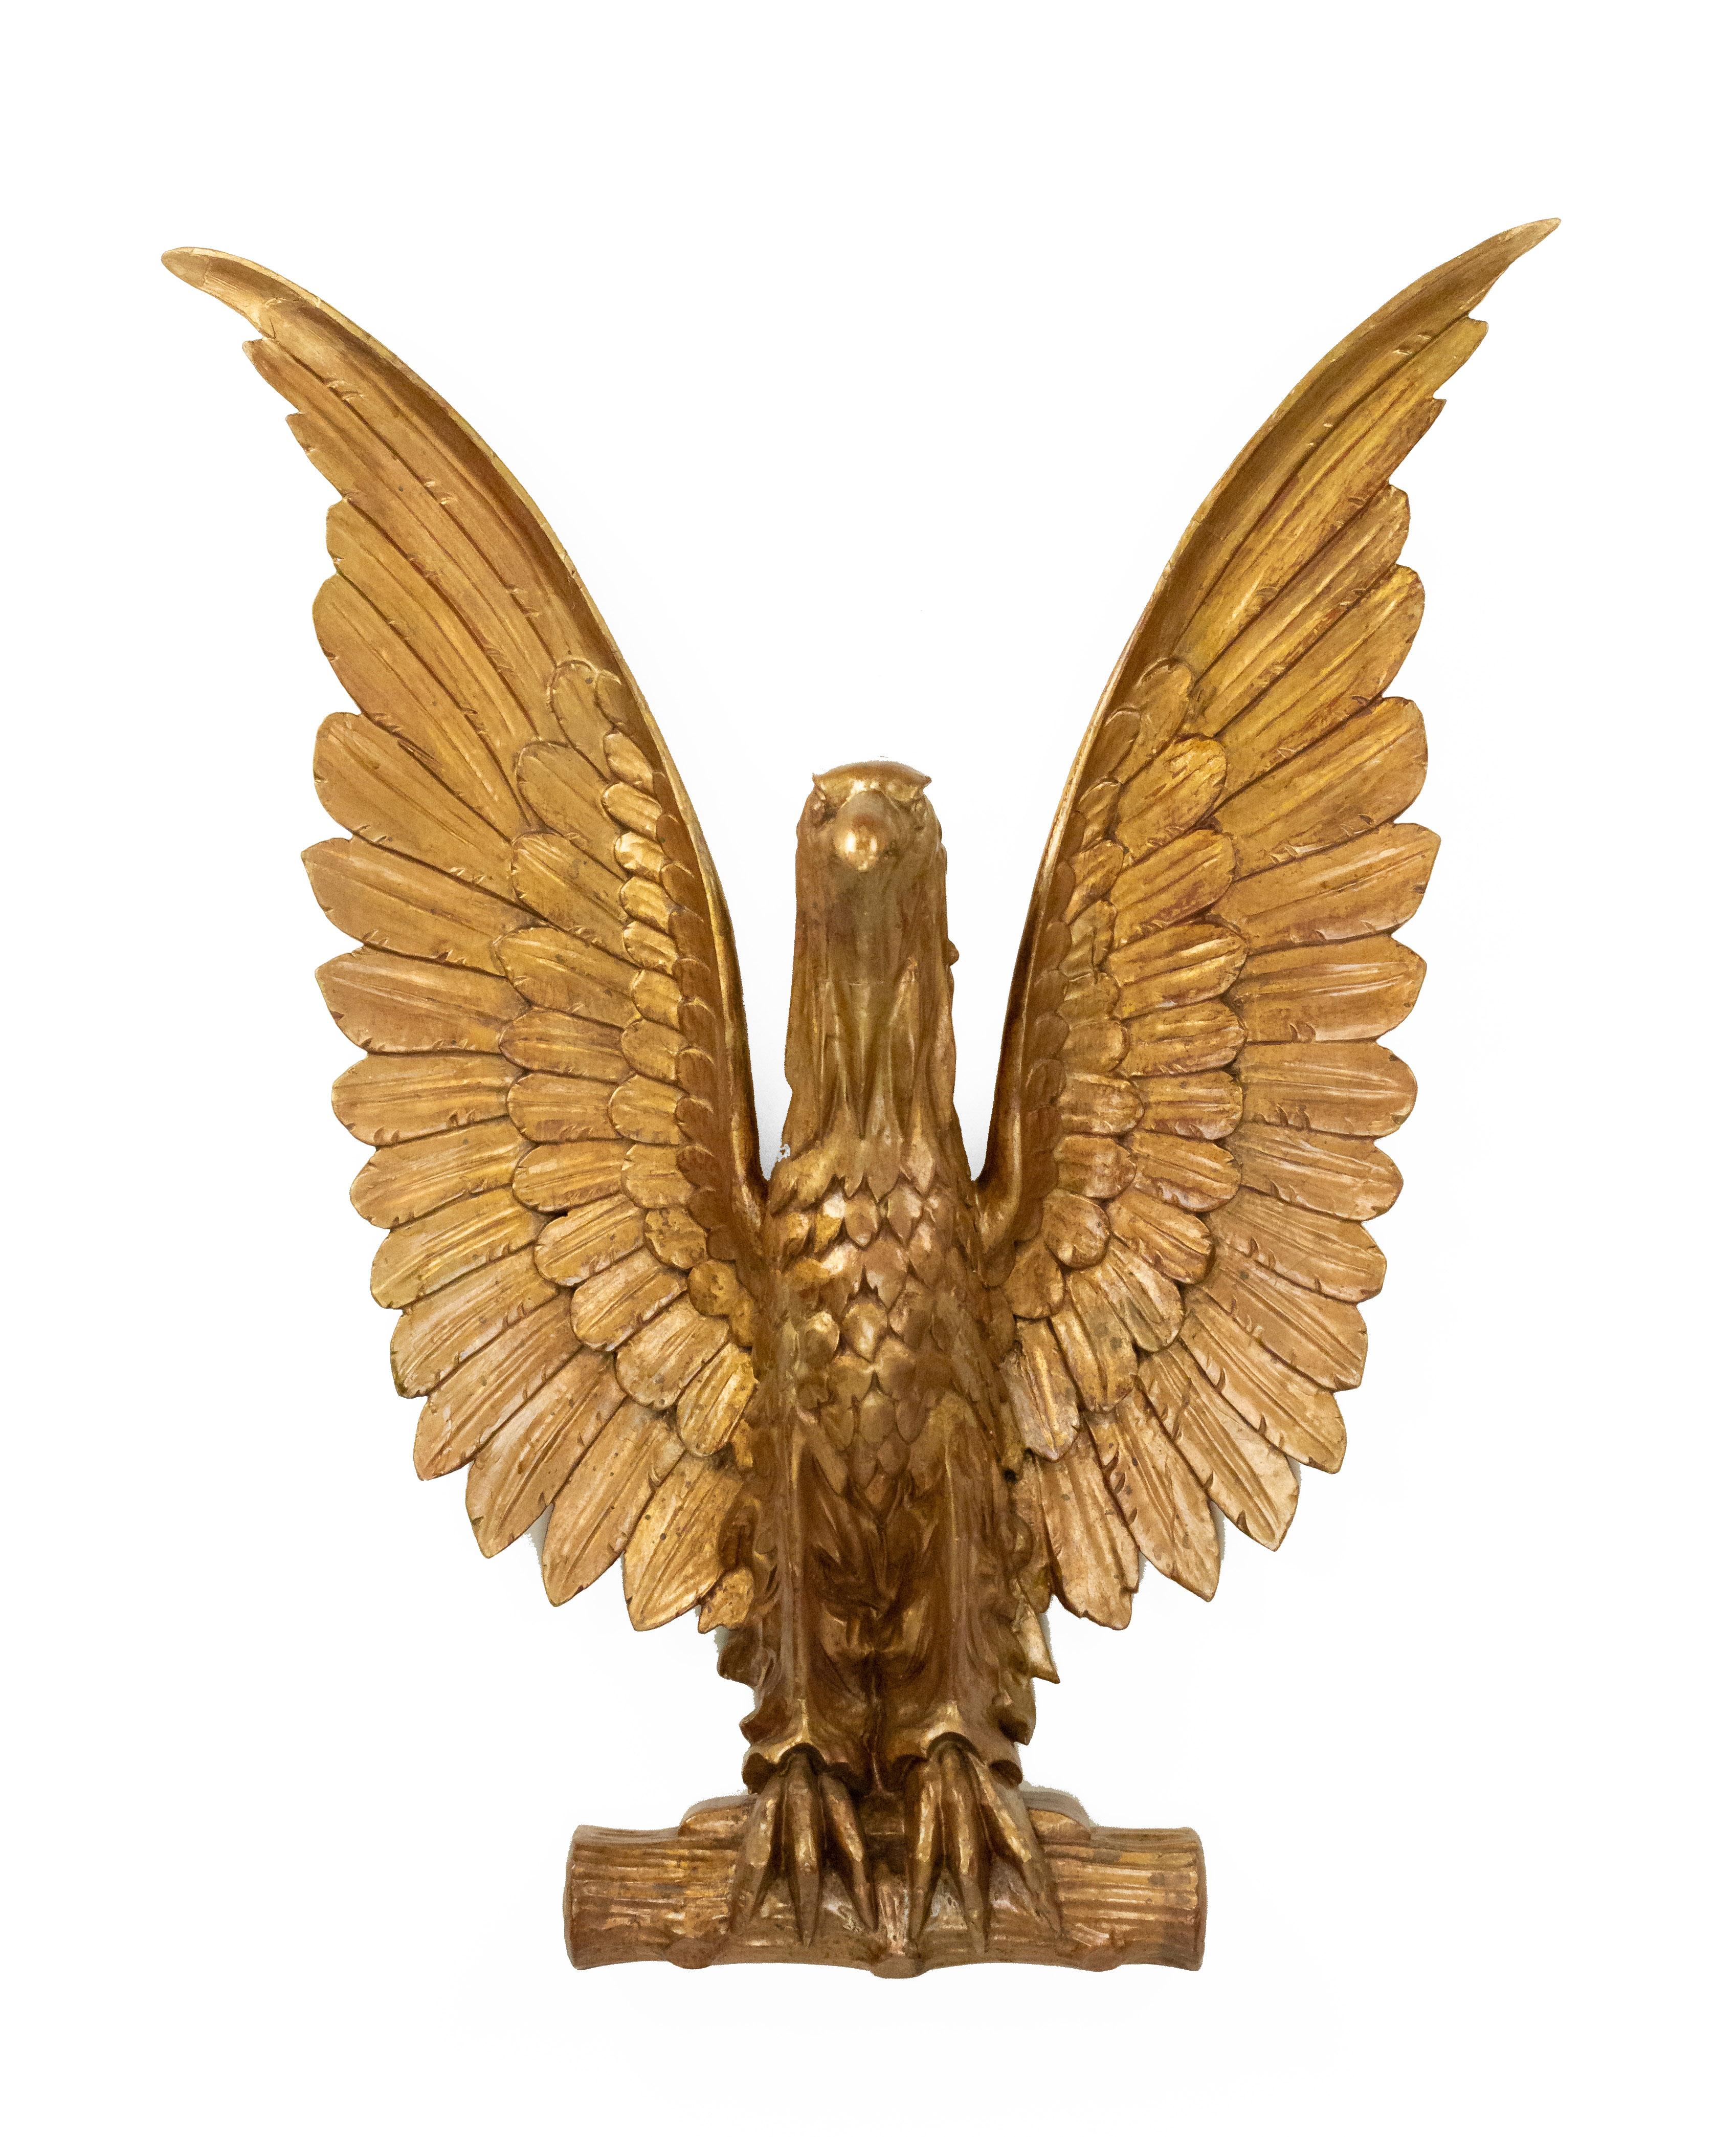 20th-Century American gilt carved eagle wall plaque with wings spread upward.